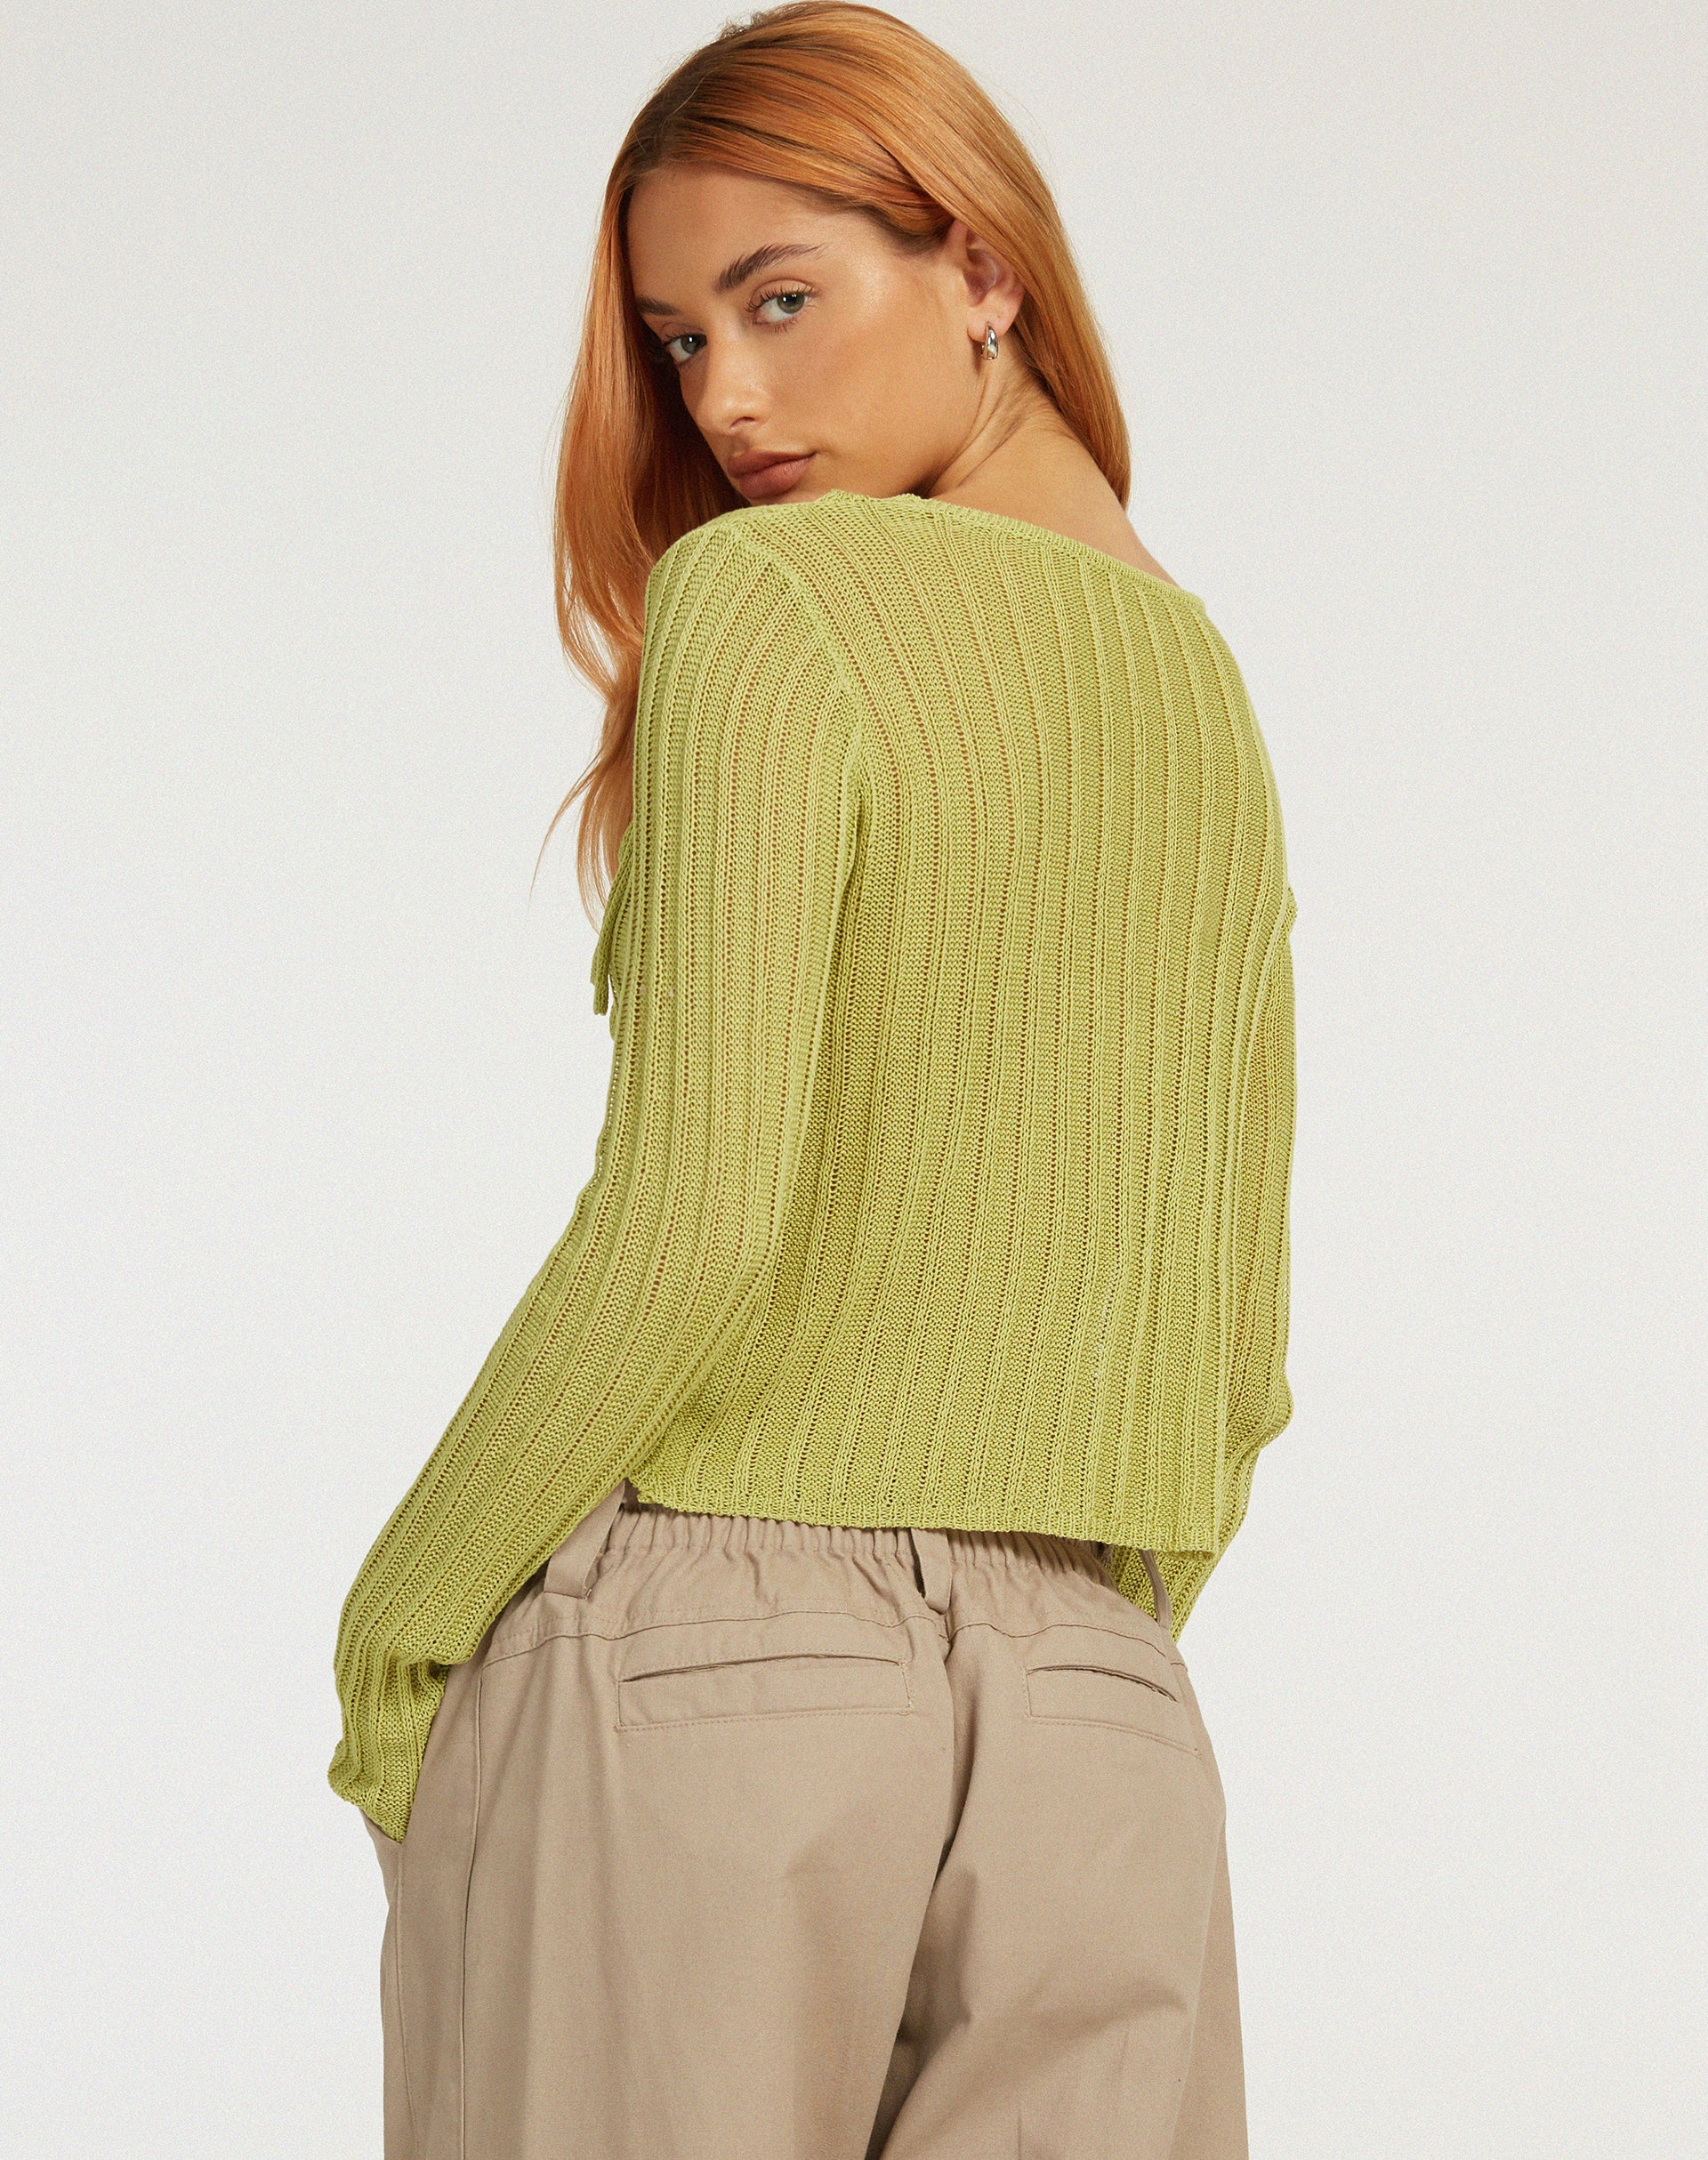 image of Potina Long Sleeve Cardi in Lime